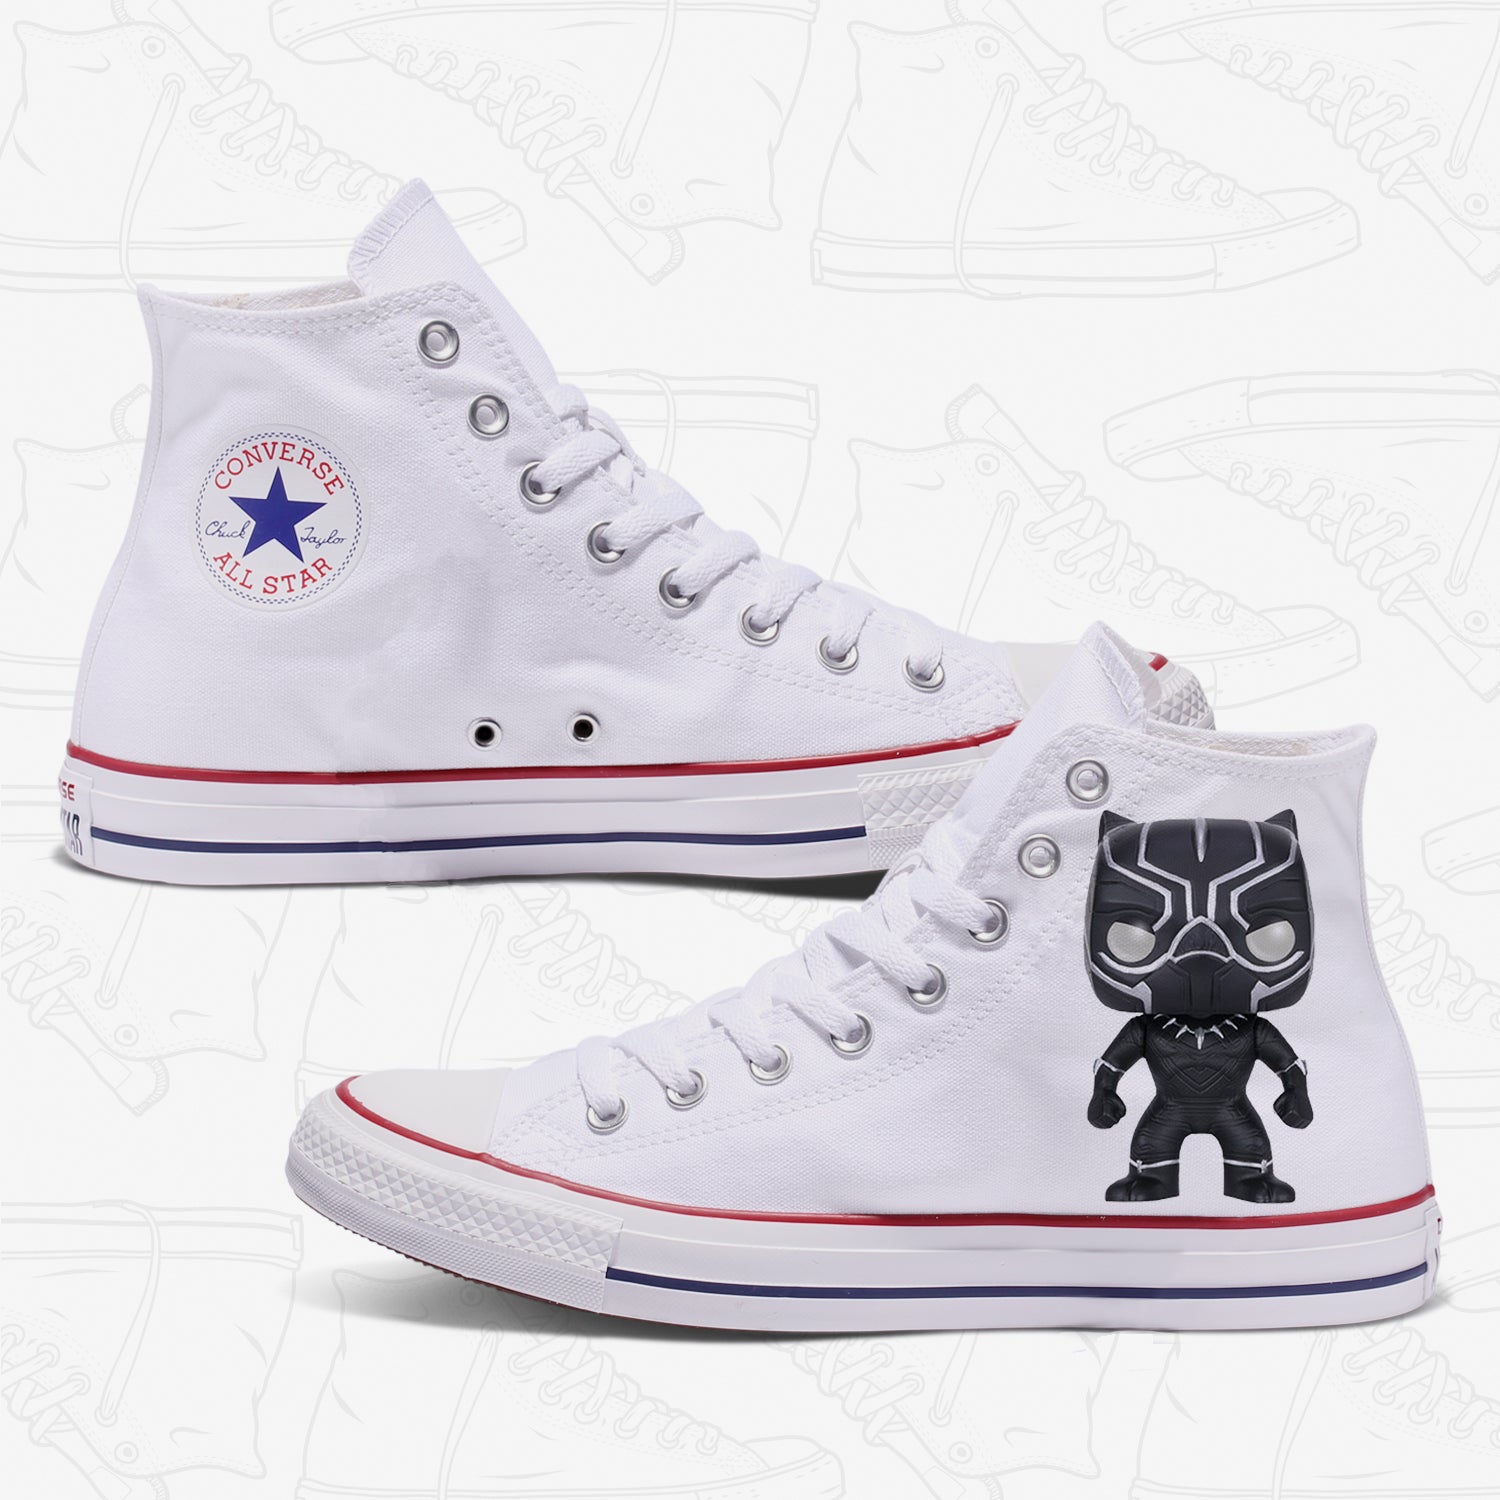 Black Panther Adult Converse Shoes